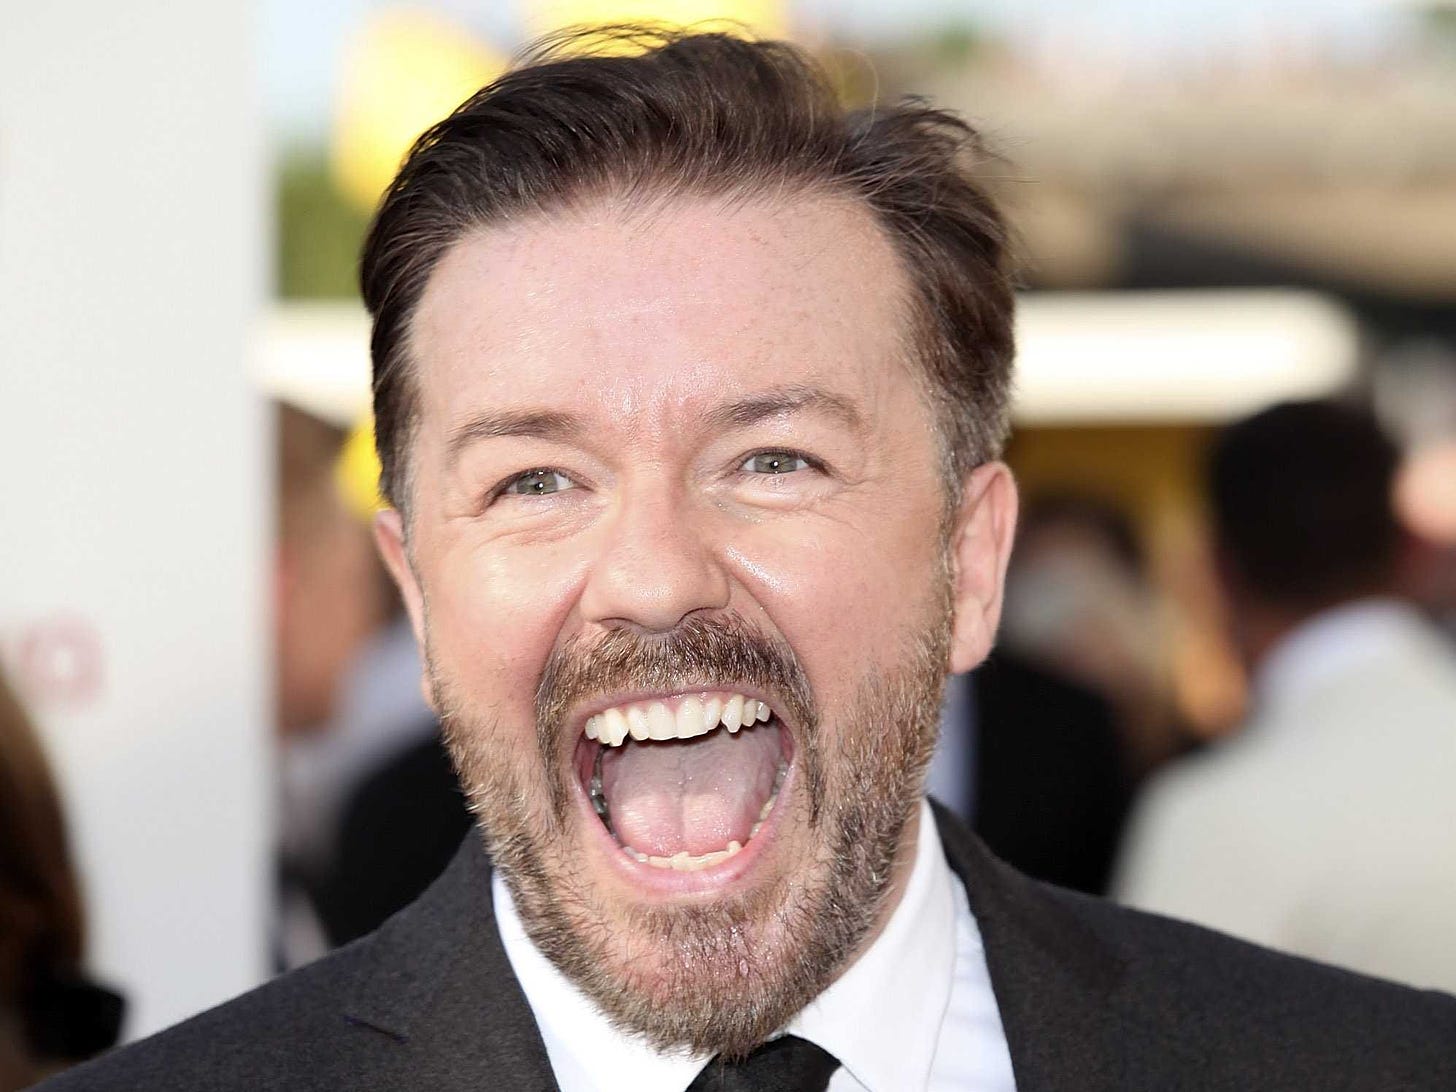 Ricky Gervais Reveals Far Too Much In Funny Reddit AMA | Business Insider